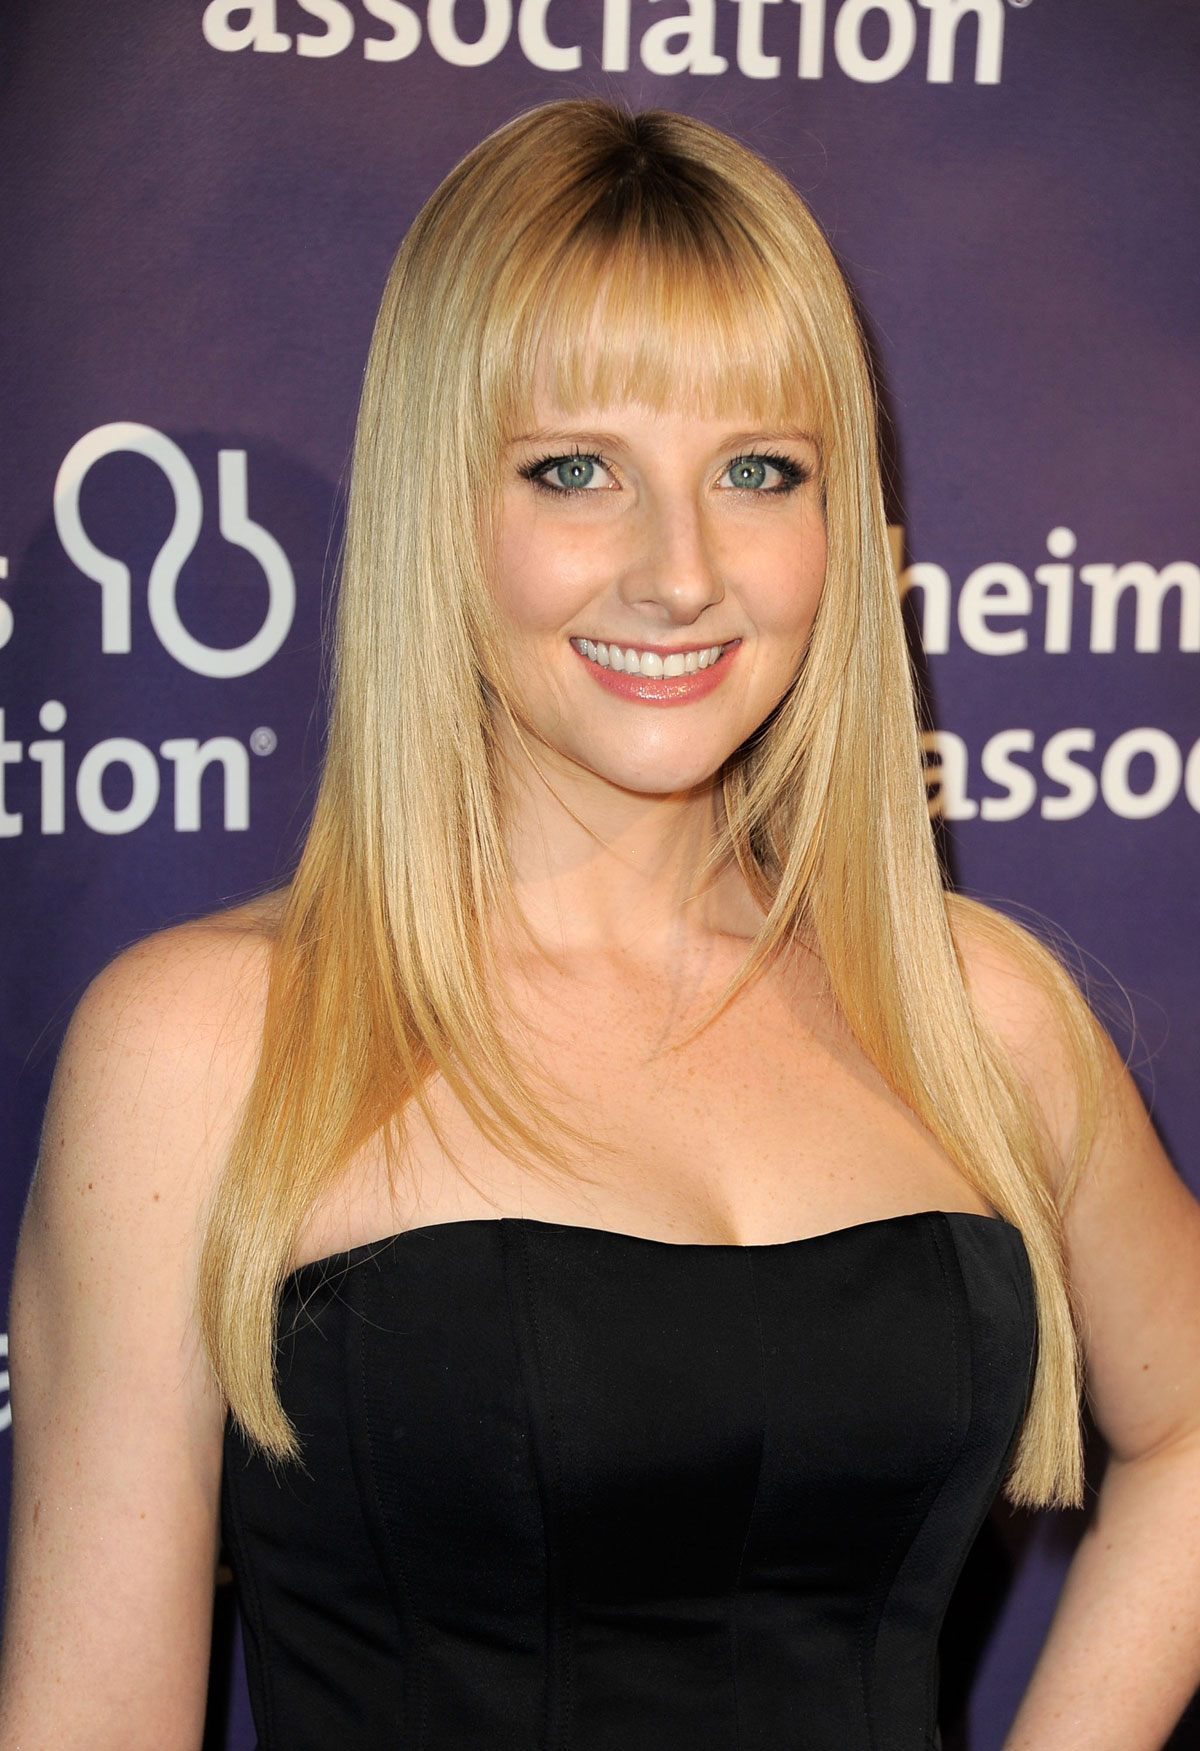 Melissa Rauch Nude And Hot Pictures - Barnorama